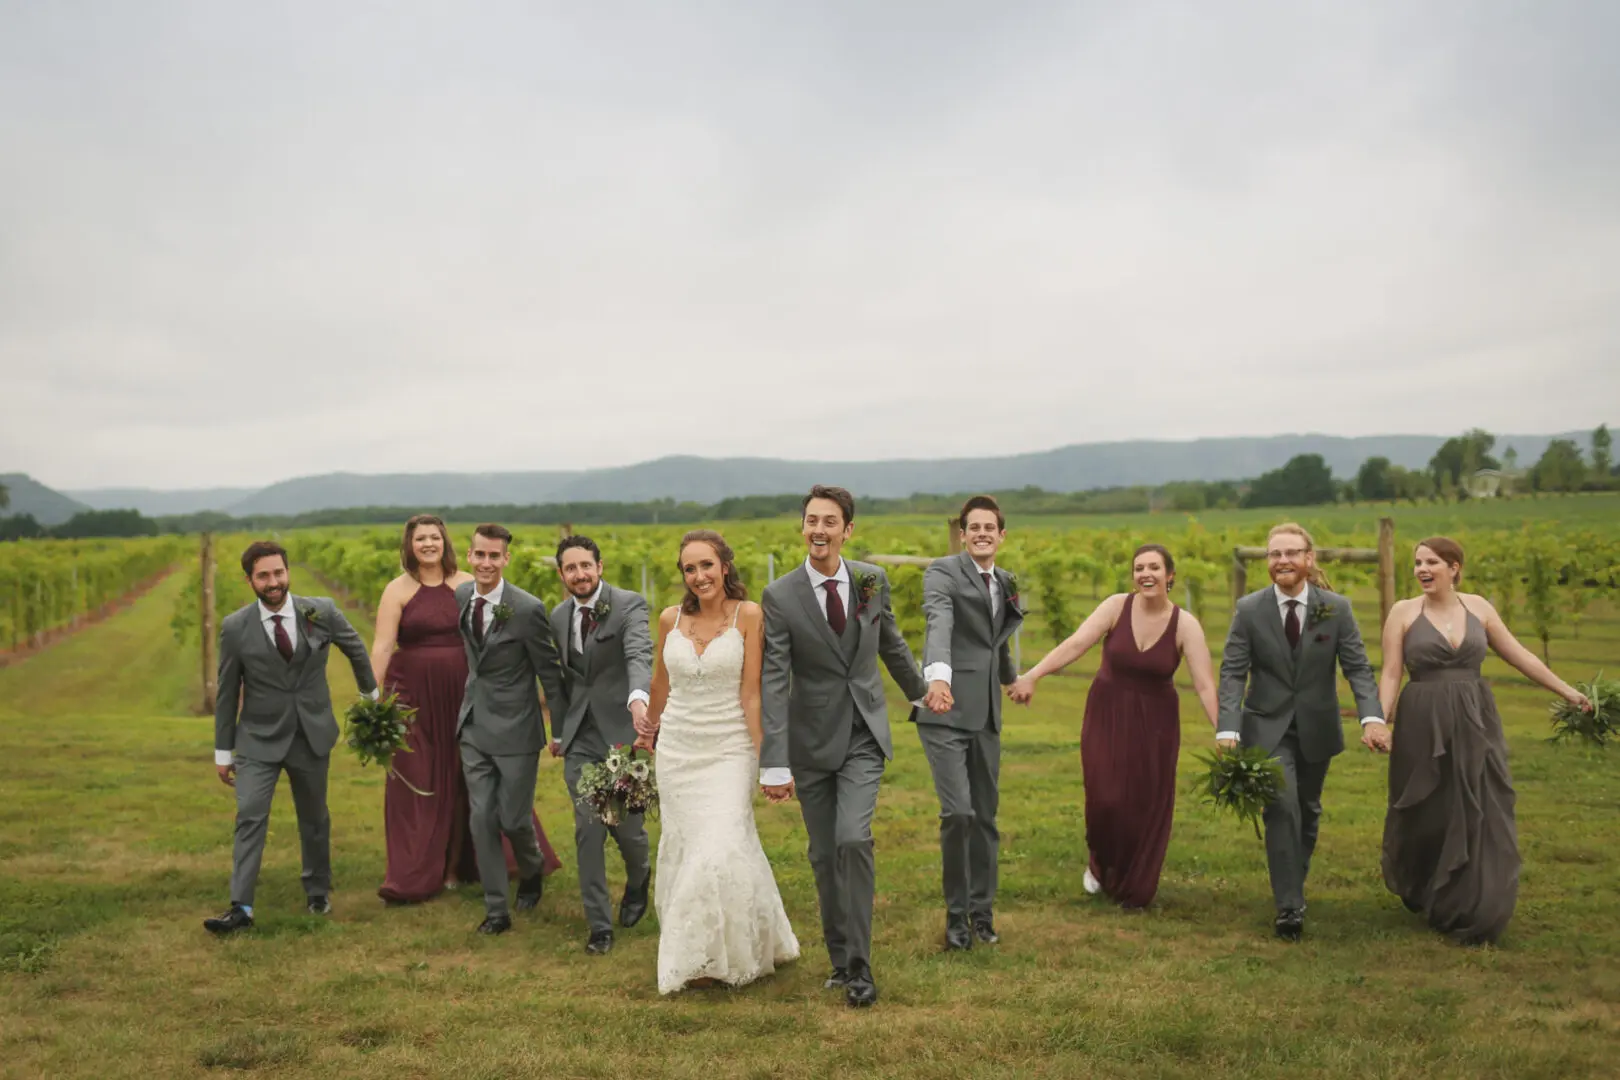 A bride and groom with their bridesmaids and groomsmen